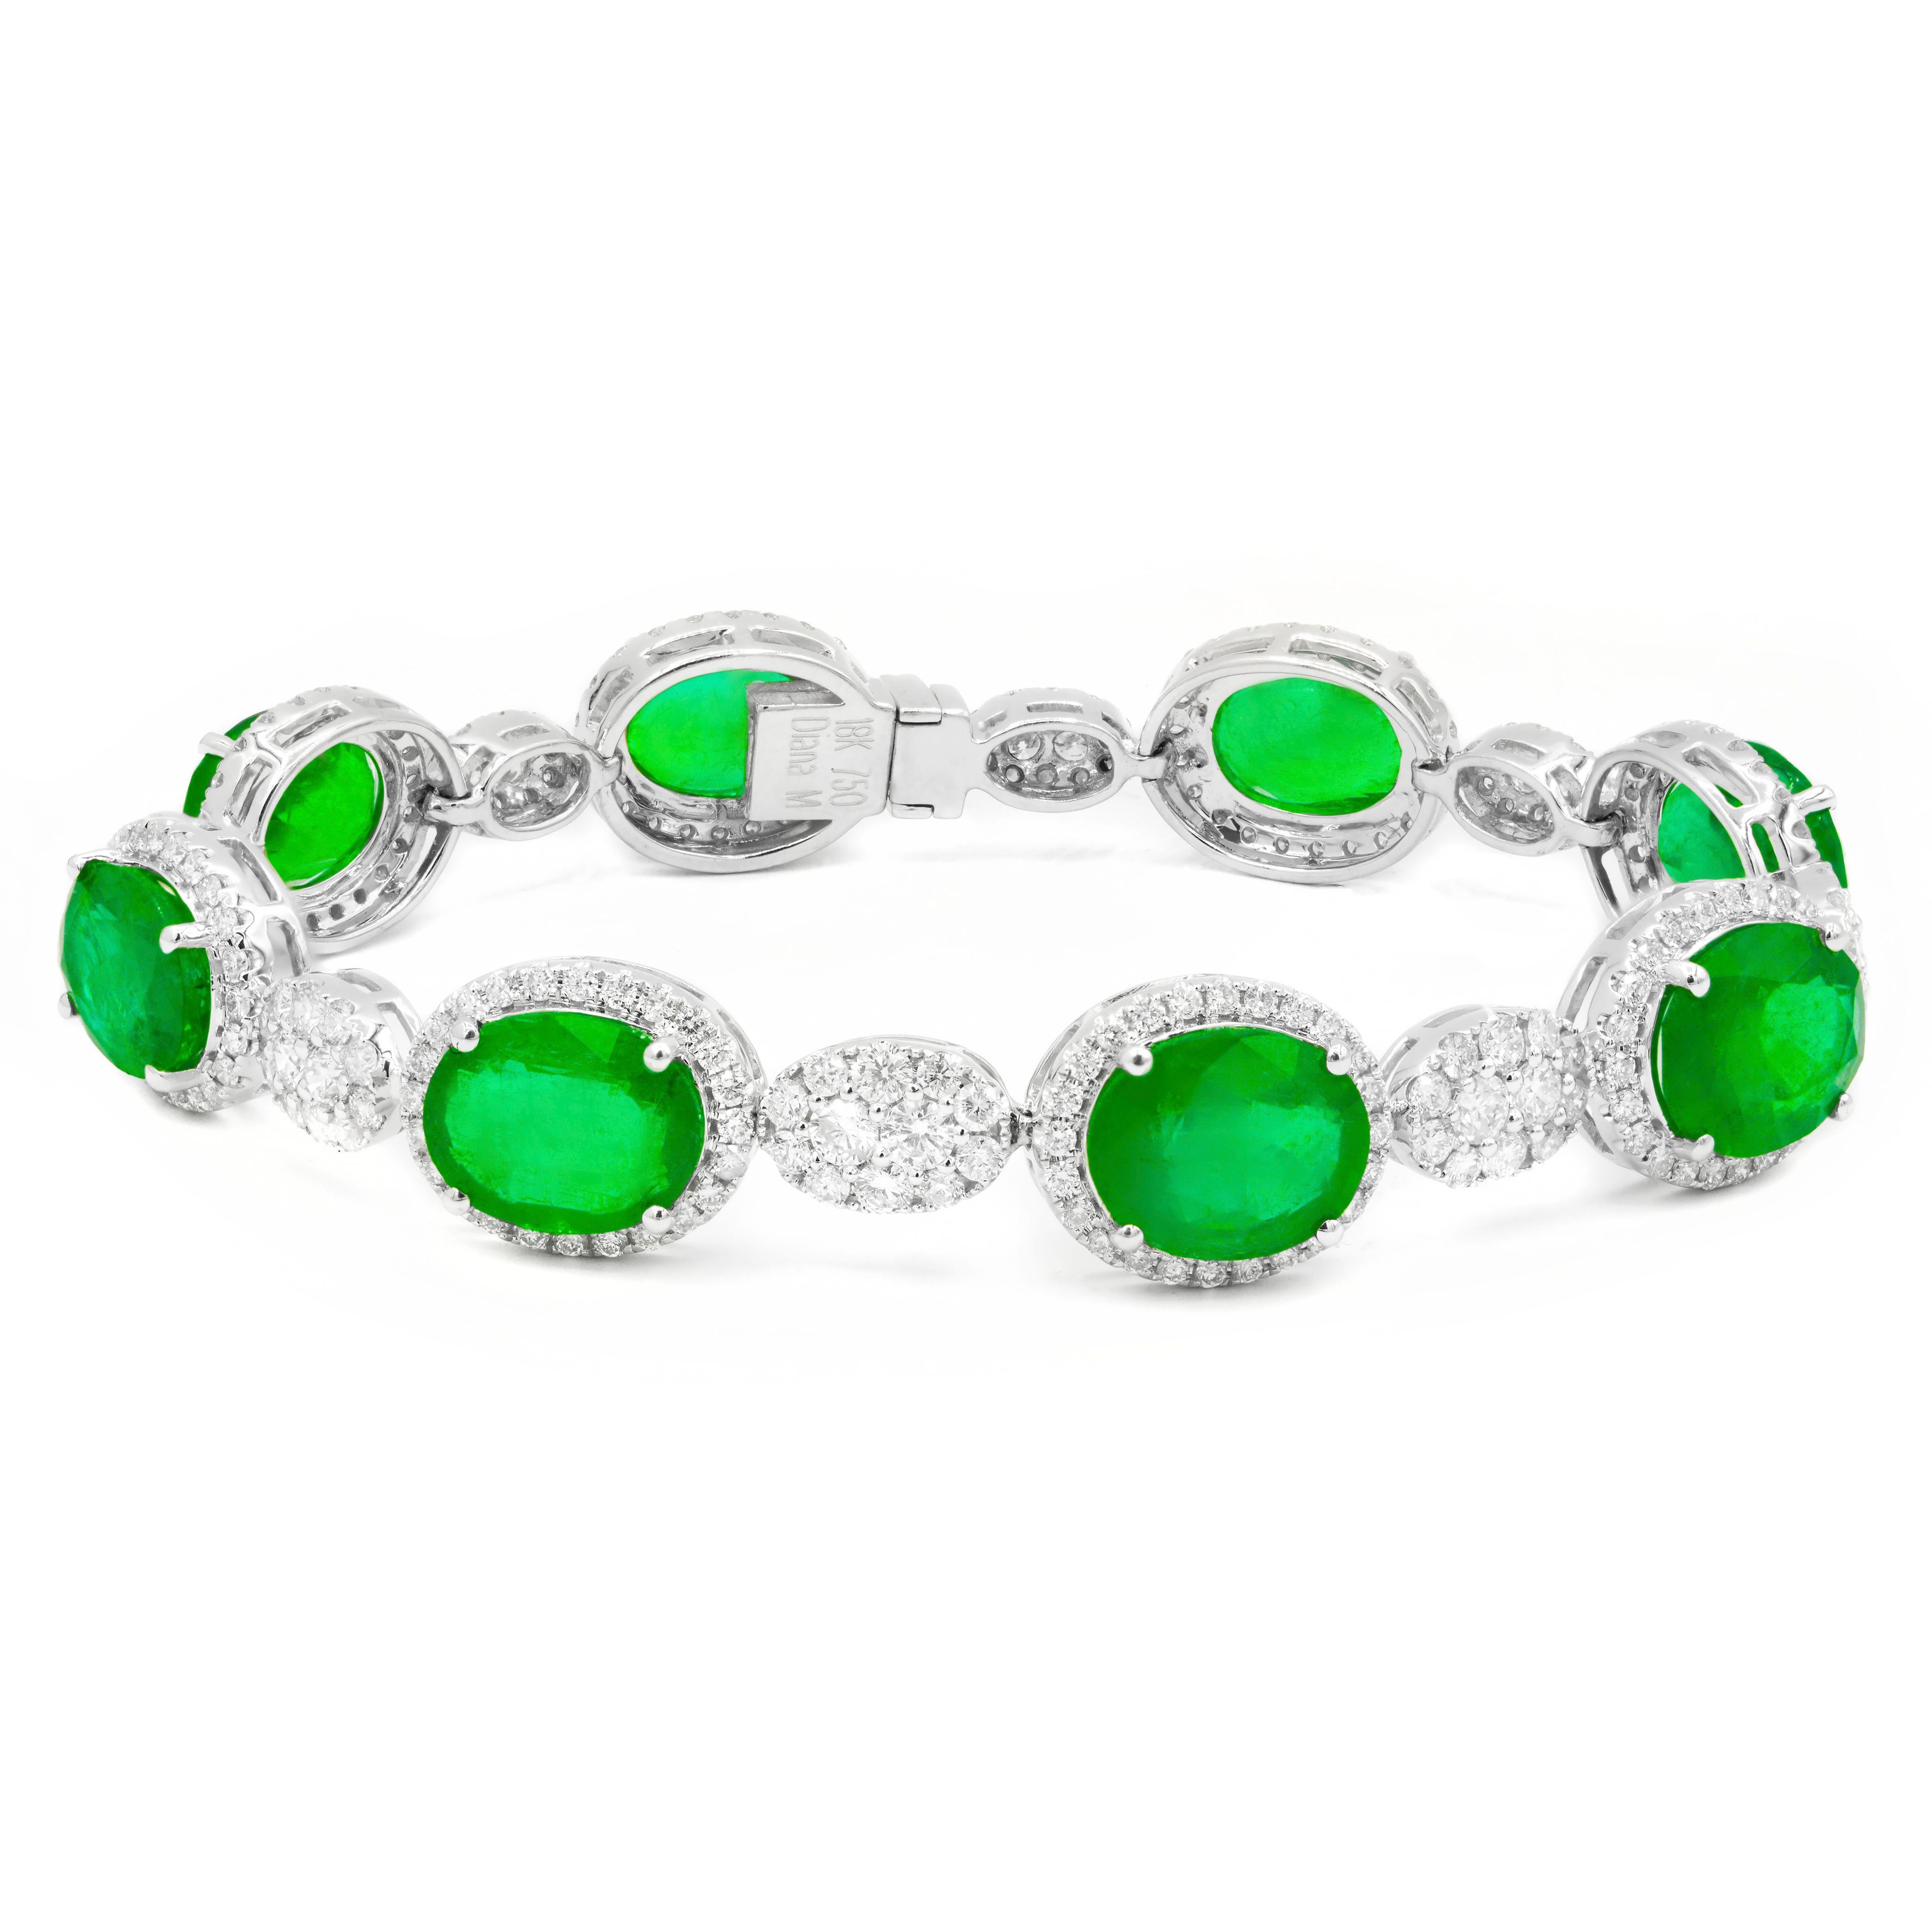 18 kt white gold emerald and diamond bracelet adorned with 20.37 cts tw of oval cut emeralds surrounded and separated by 4.22 cts tw of C.Dunaigre certified diamonds